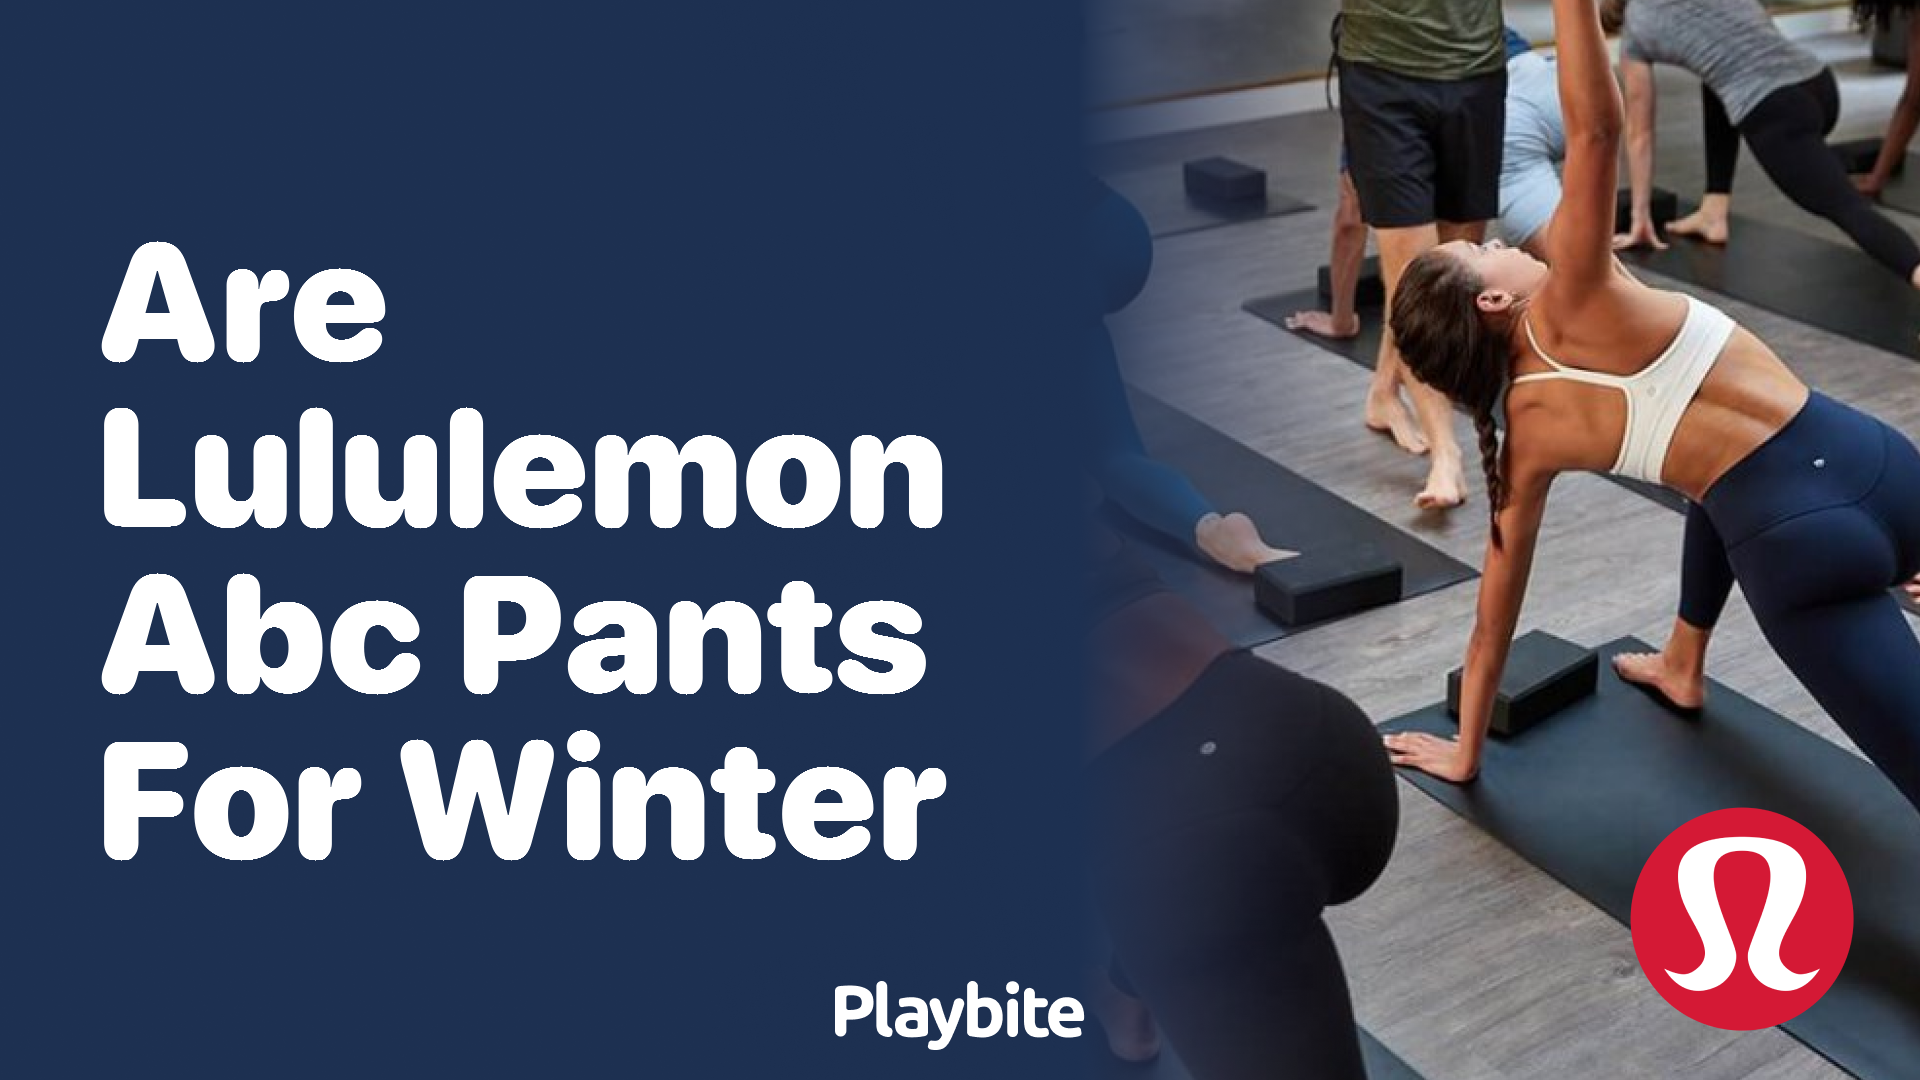 How to Tell What Type of Lululemon Leggings You Have - Playbite